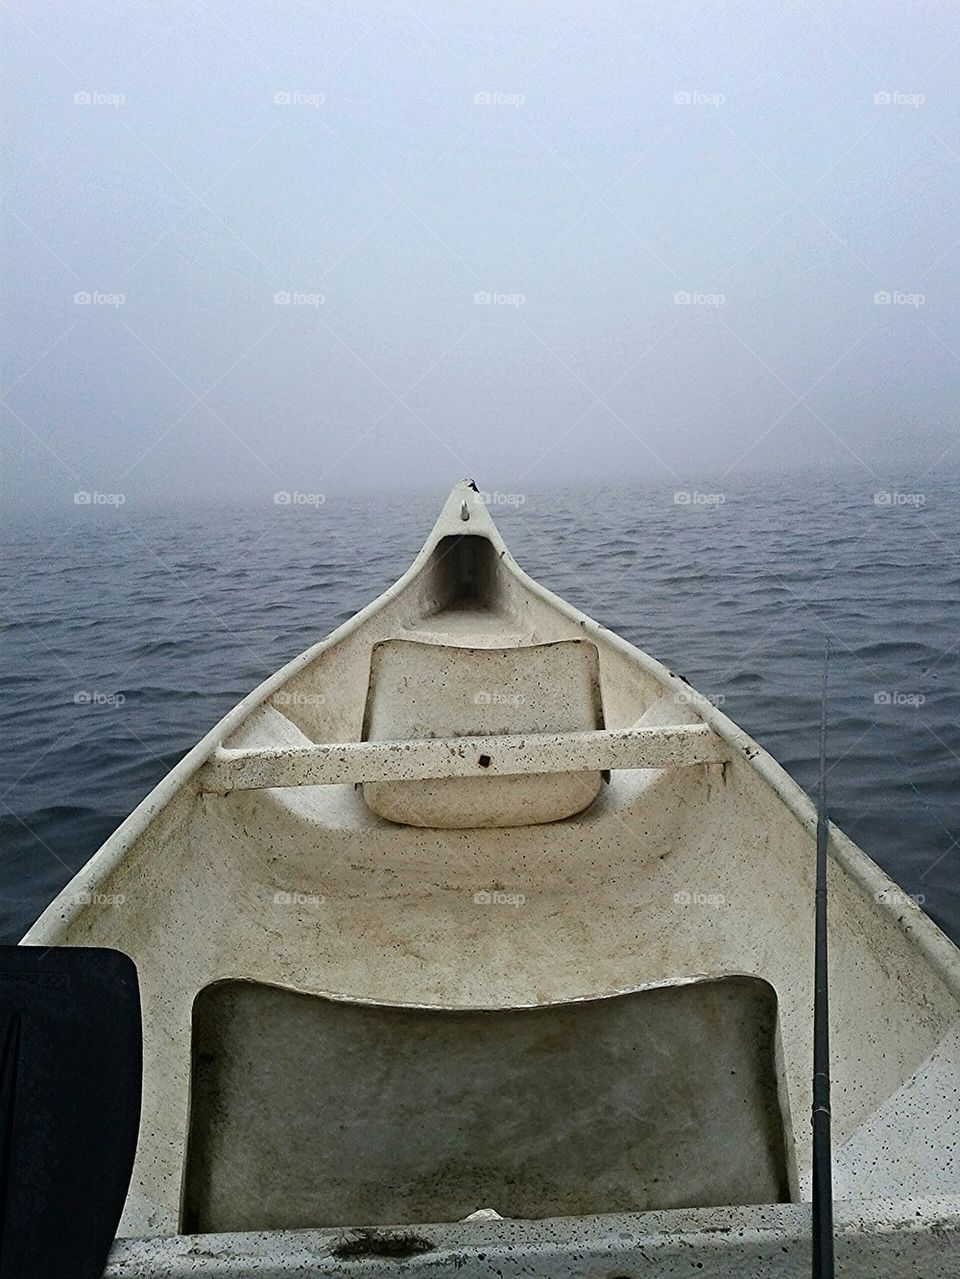 Boat at sea and view of fog